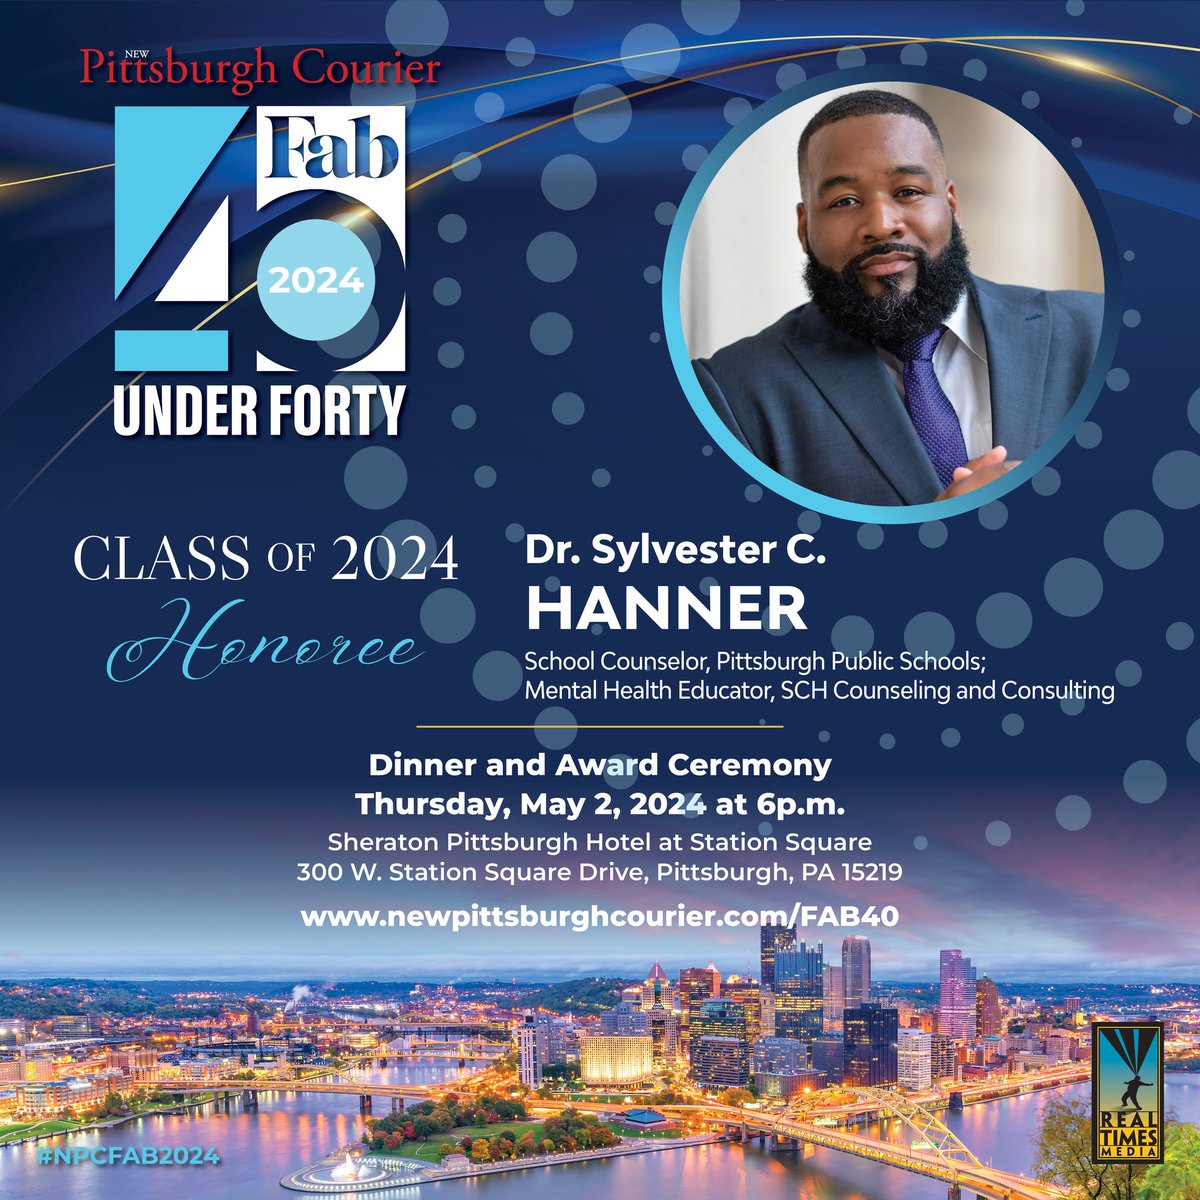 🎉 Congratulations to Dr. Sylvester Hanner for being named one of the Pittsburgh Couriers' Fab 40 Under 40! Your dedication and leadership are inspiring. We're proud to have you as part of our PPS family! #PPSProud #WeArePPS